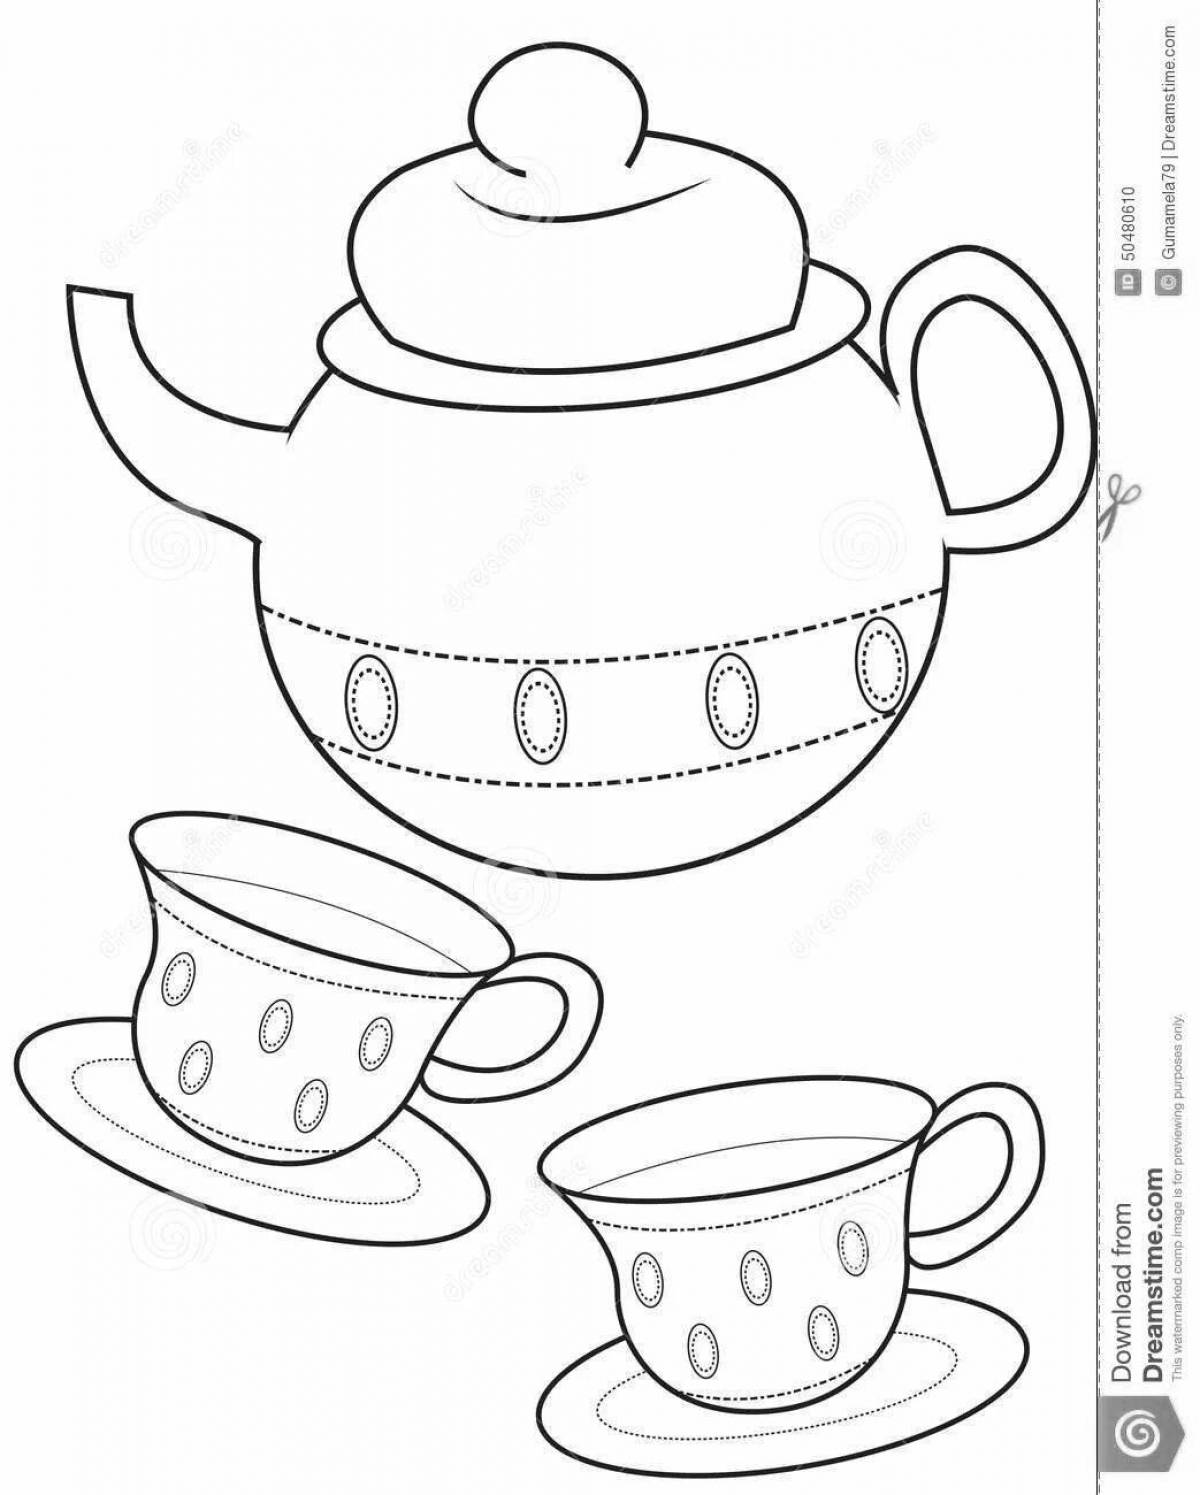 Outstanding teapot and cup coloring book for preschoolers